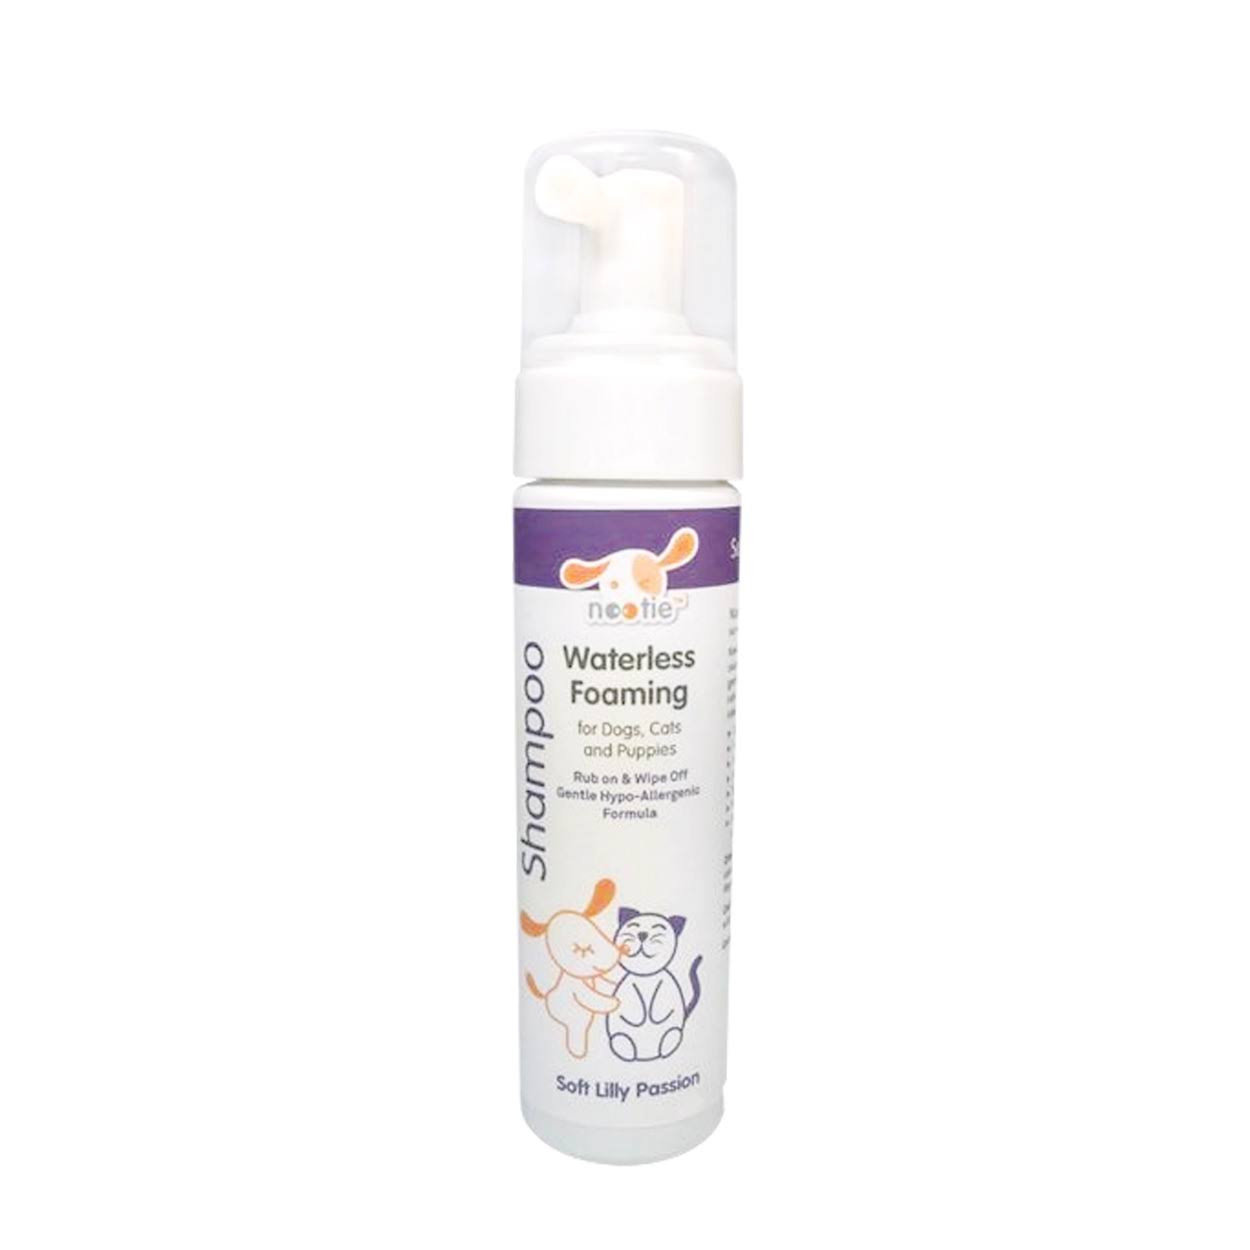 Nootie Foaming Waterless Shampoo for Dogs and Cats - 7oz, Soft Lily Passion